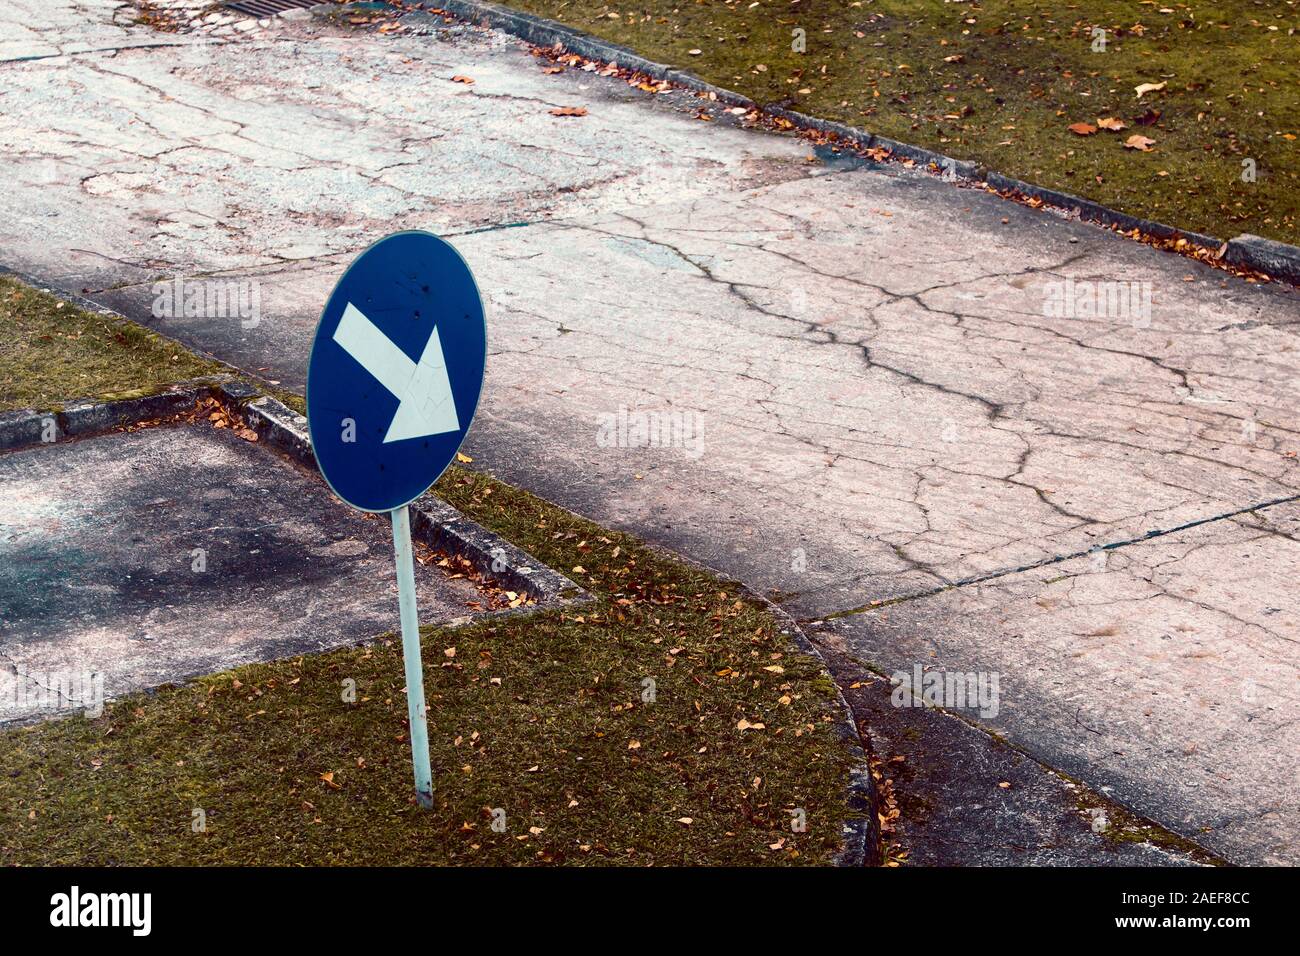 Arrow sign to an empty road in bad condition. Emphasis on transport infrastructure, transport policy, neglect and upkeep. Stock Photo